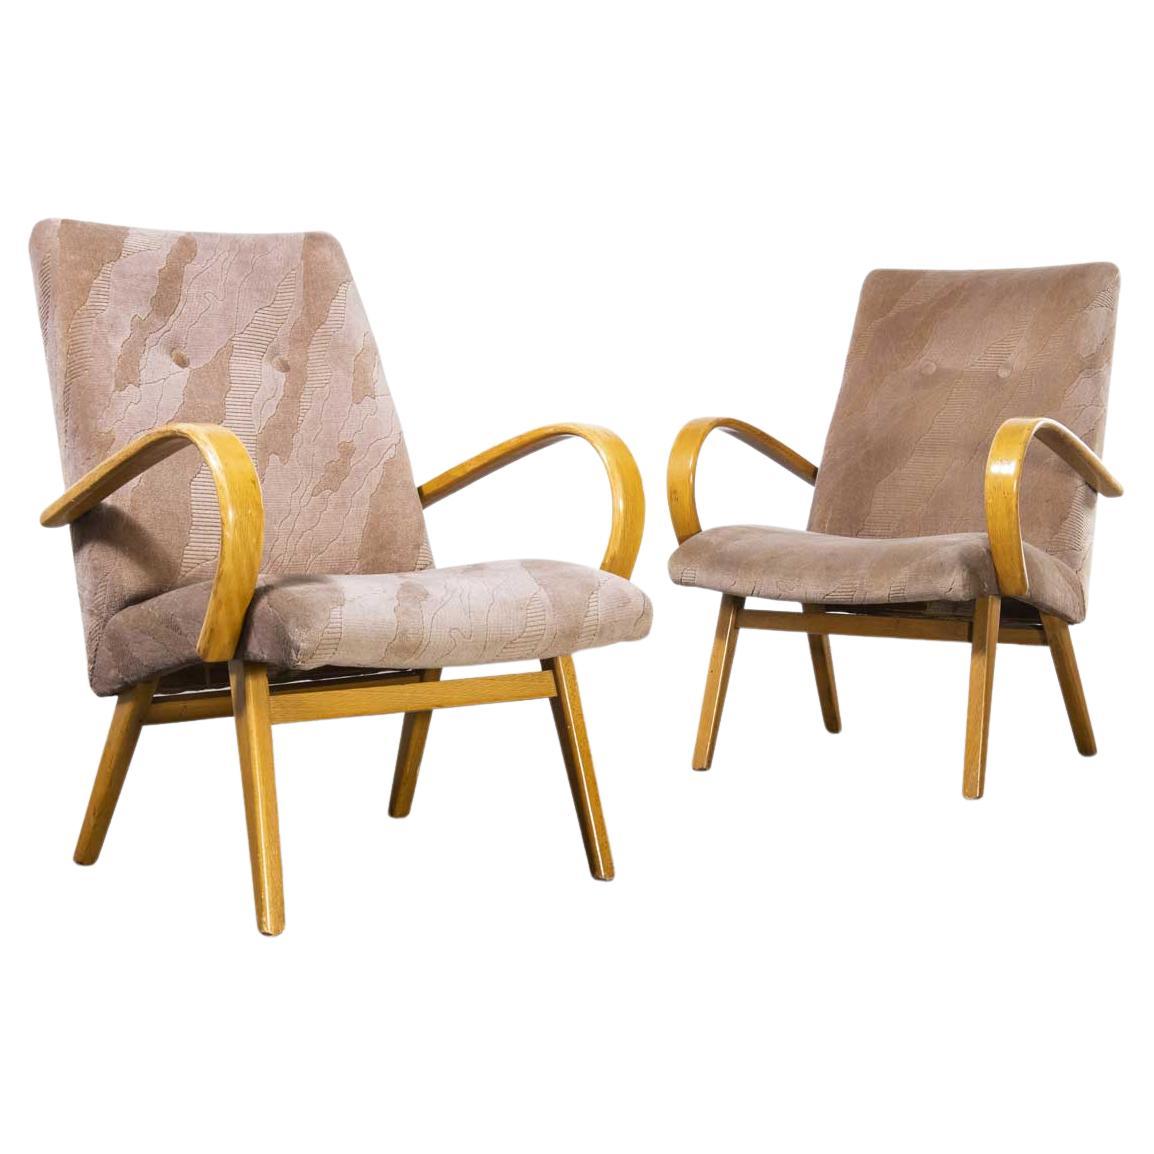 1960's Original Pair of Armchairs - Produced by Ton For Sale